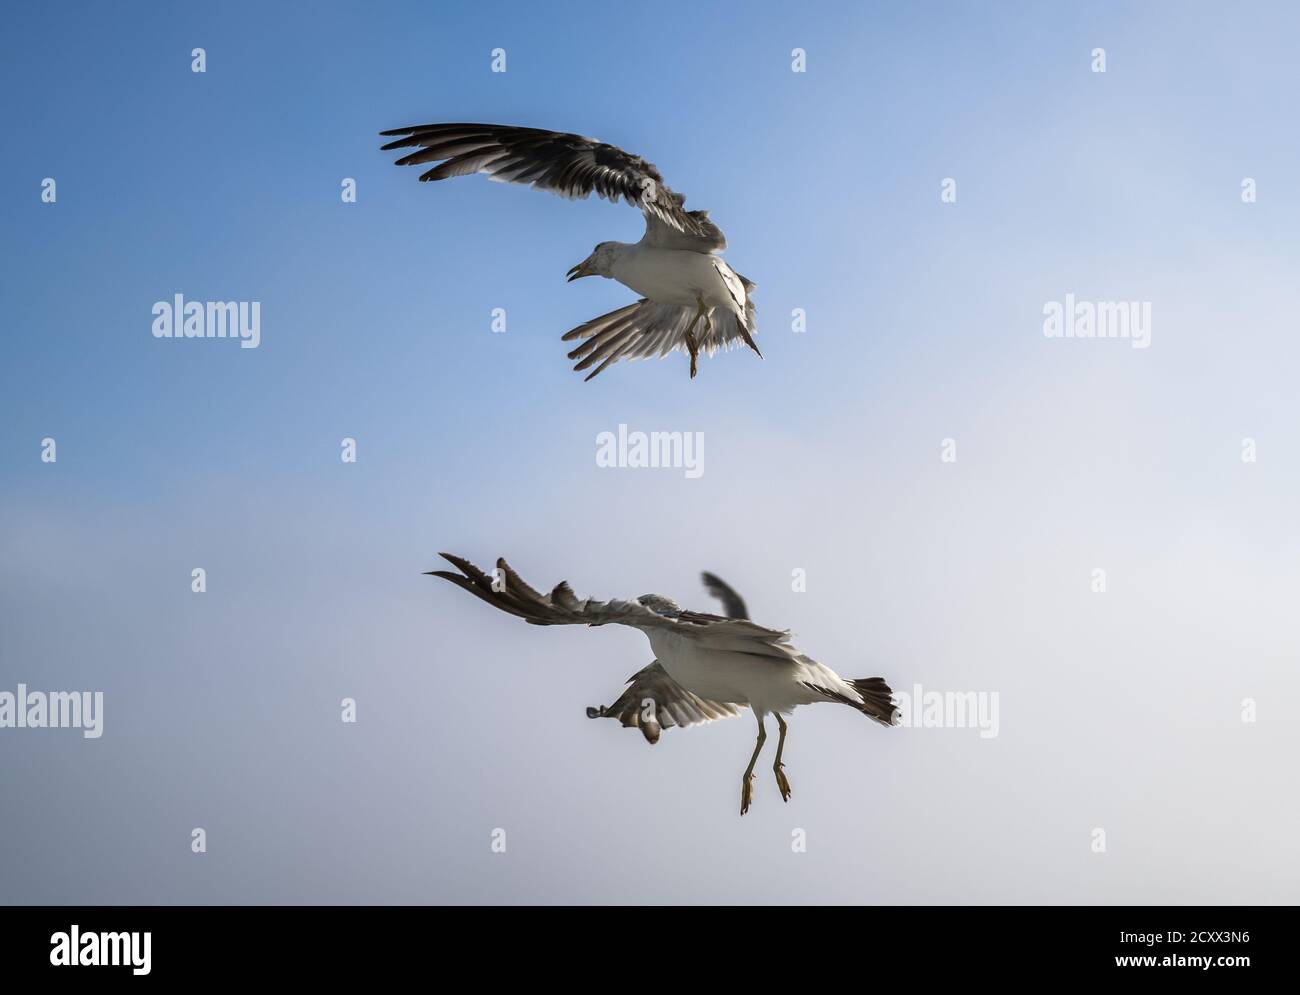 Flying seagulls over blue sky. Stock Photo